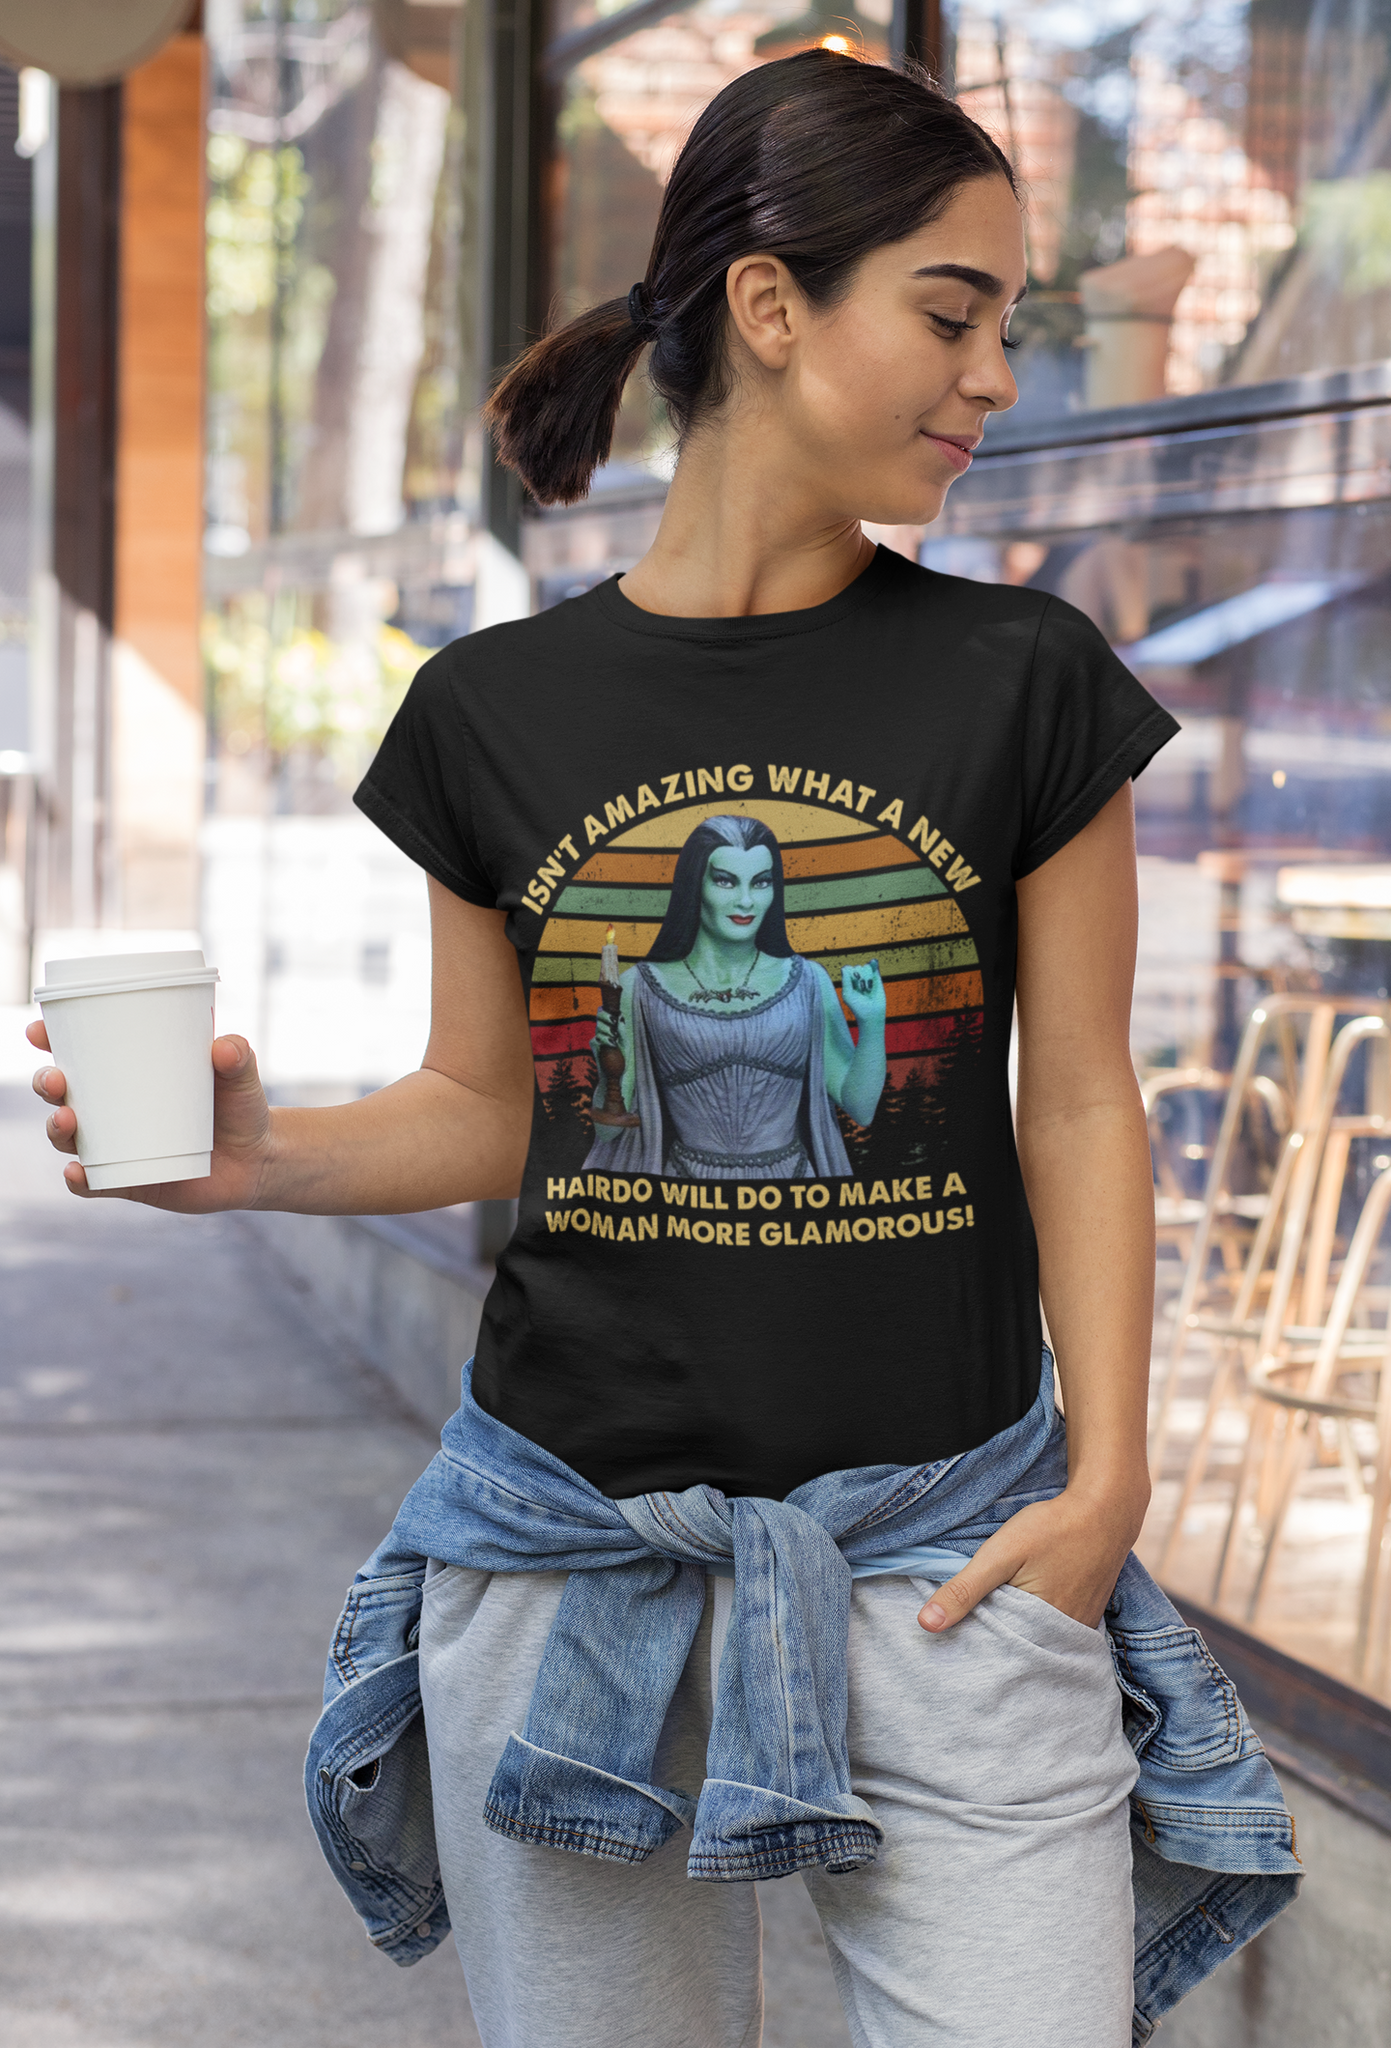 Frankenstein Vintage T Shirt, Lily Munster T Shirt, What A New Hairdo Will Do To Make A Woman More Glamorous Tshirt, Halloween Gifts